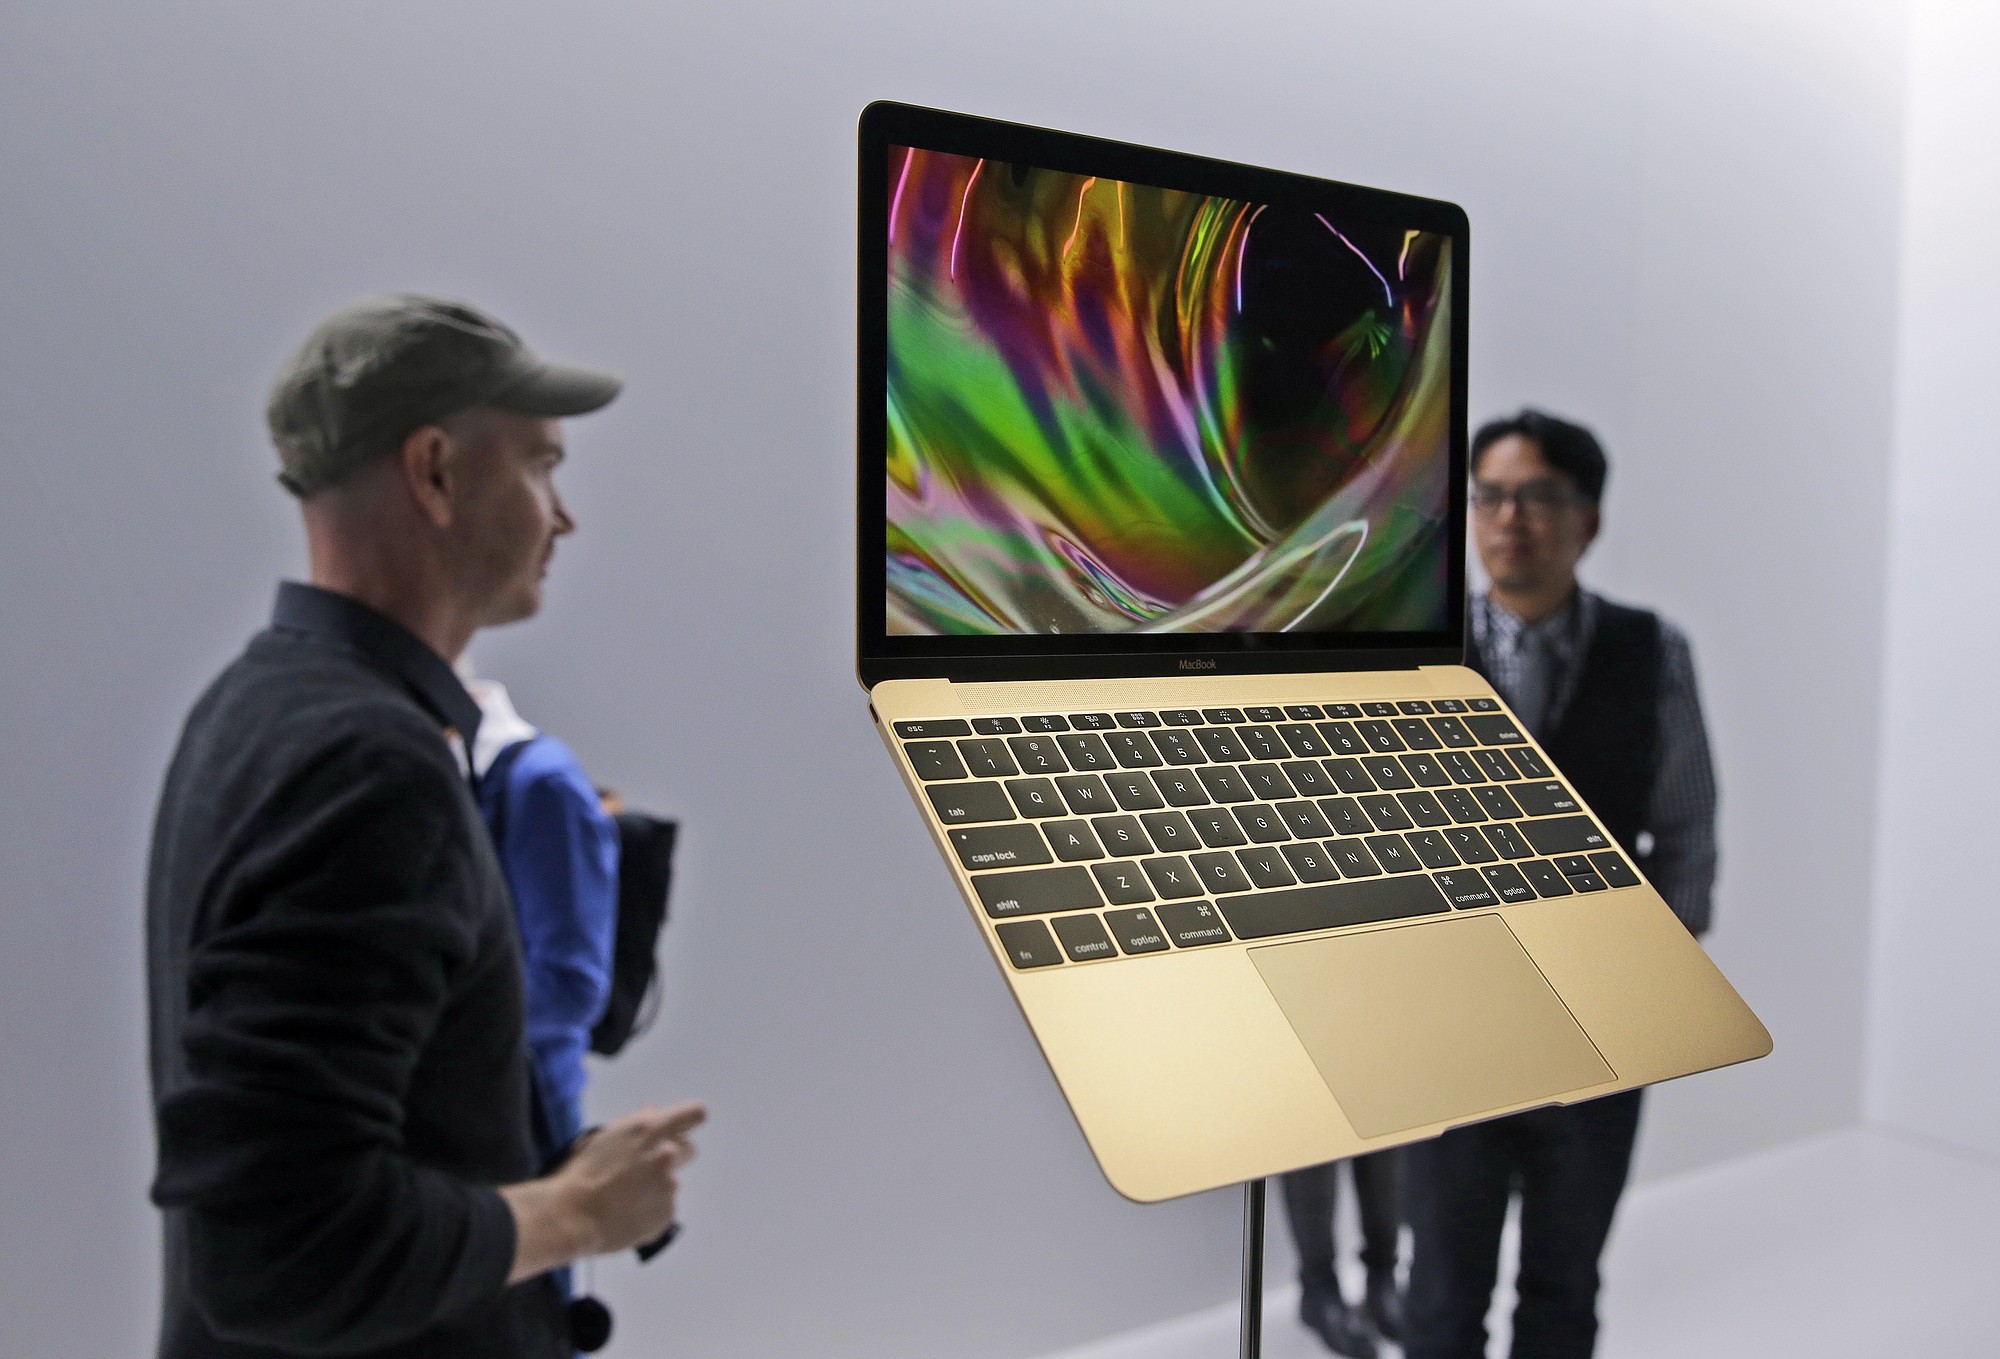 Members of the media and Apple guests get a look at a display of the new MacBook in the demo room after an Apple event on Monday in San Francisco.